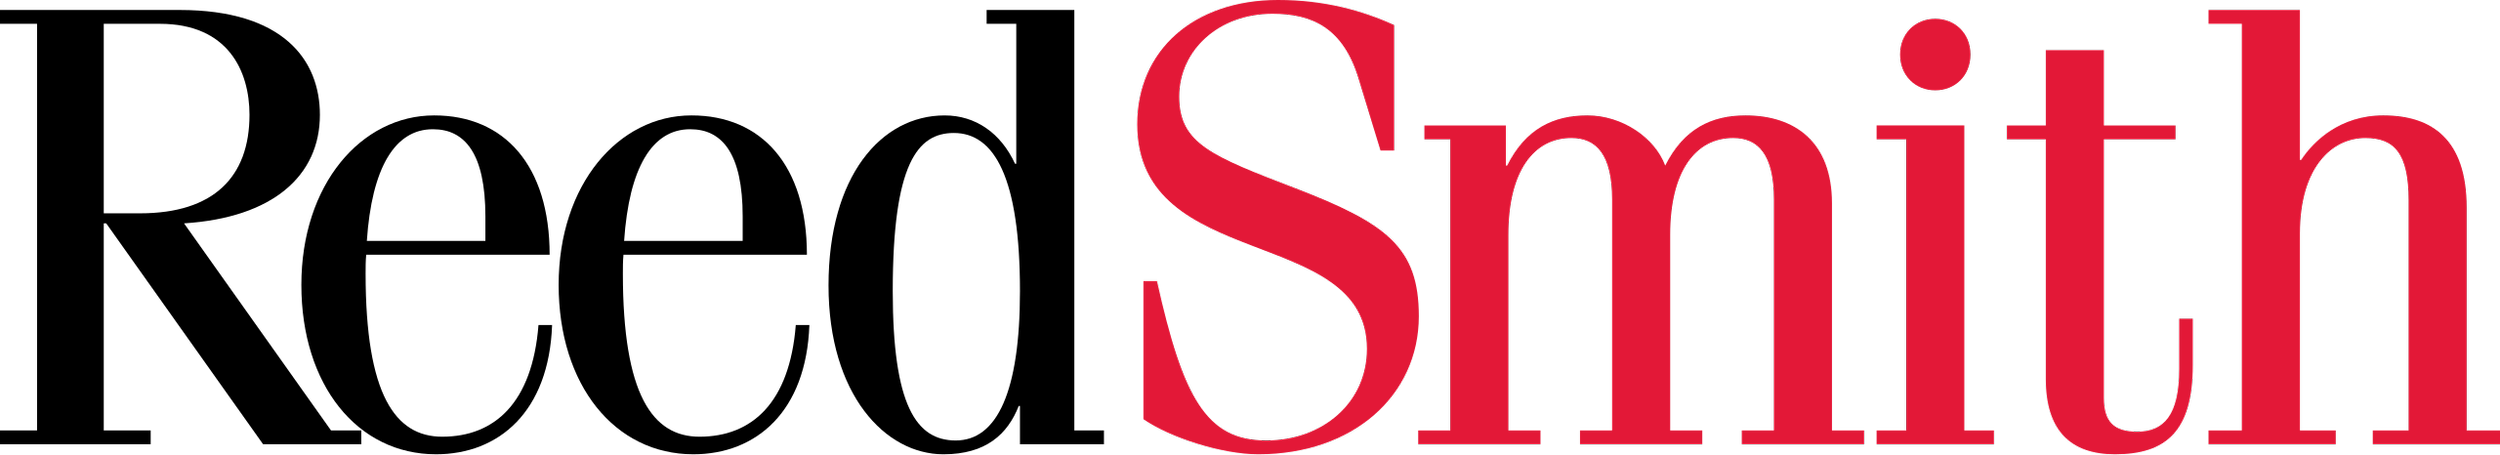 Reed_Smith_Logo.svg.png